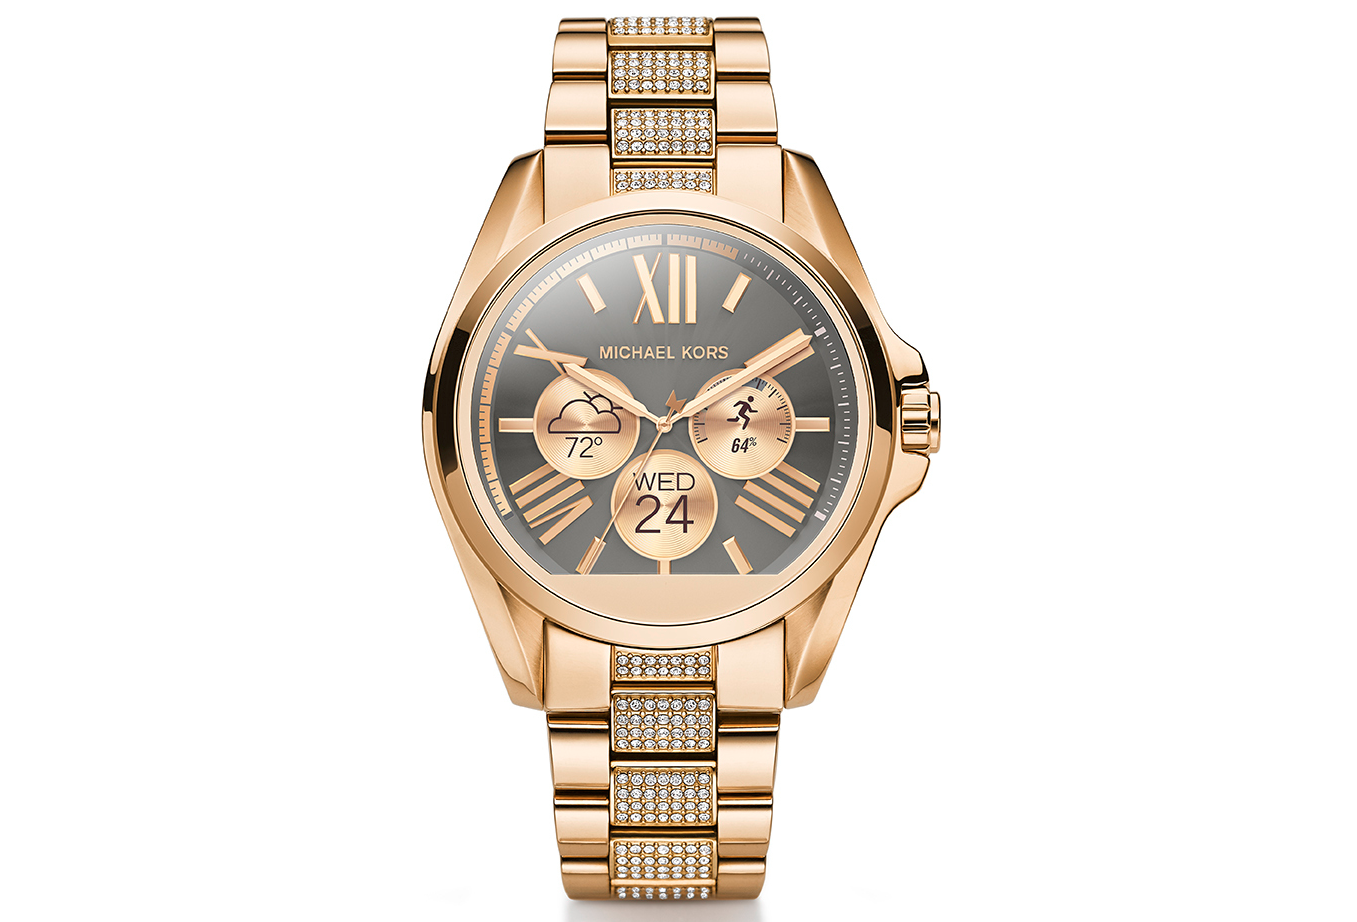 Michael Kors Announces An Android Wear 